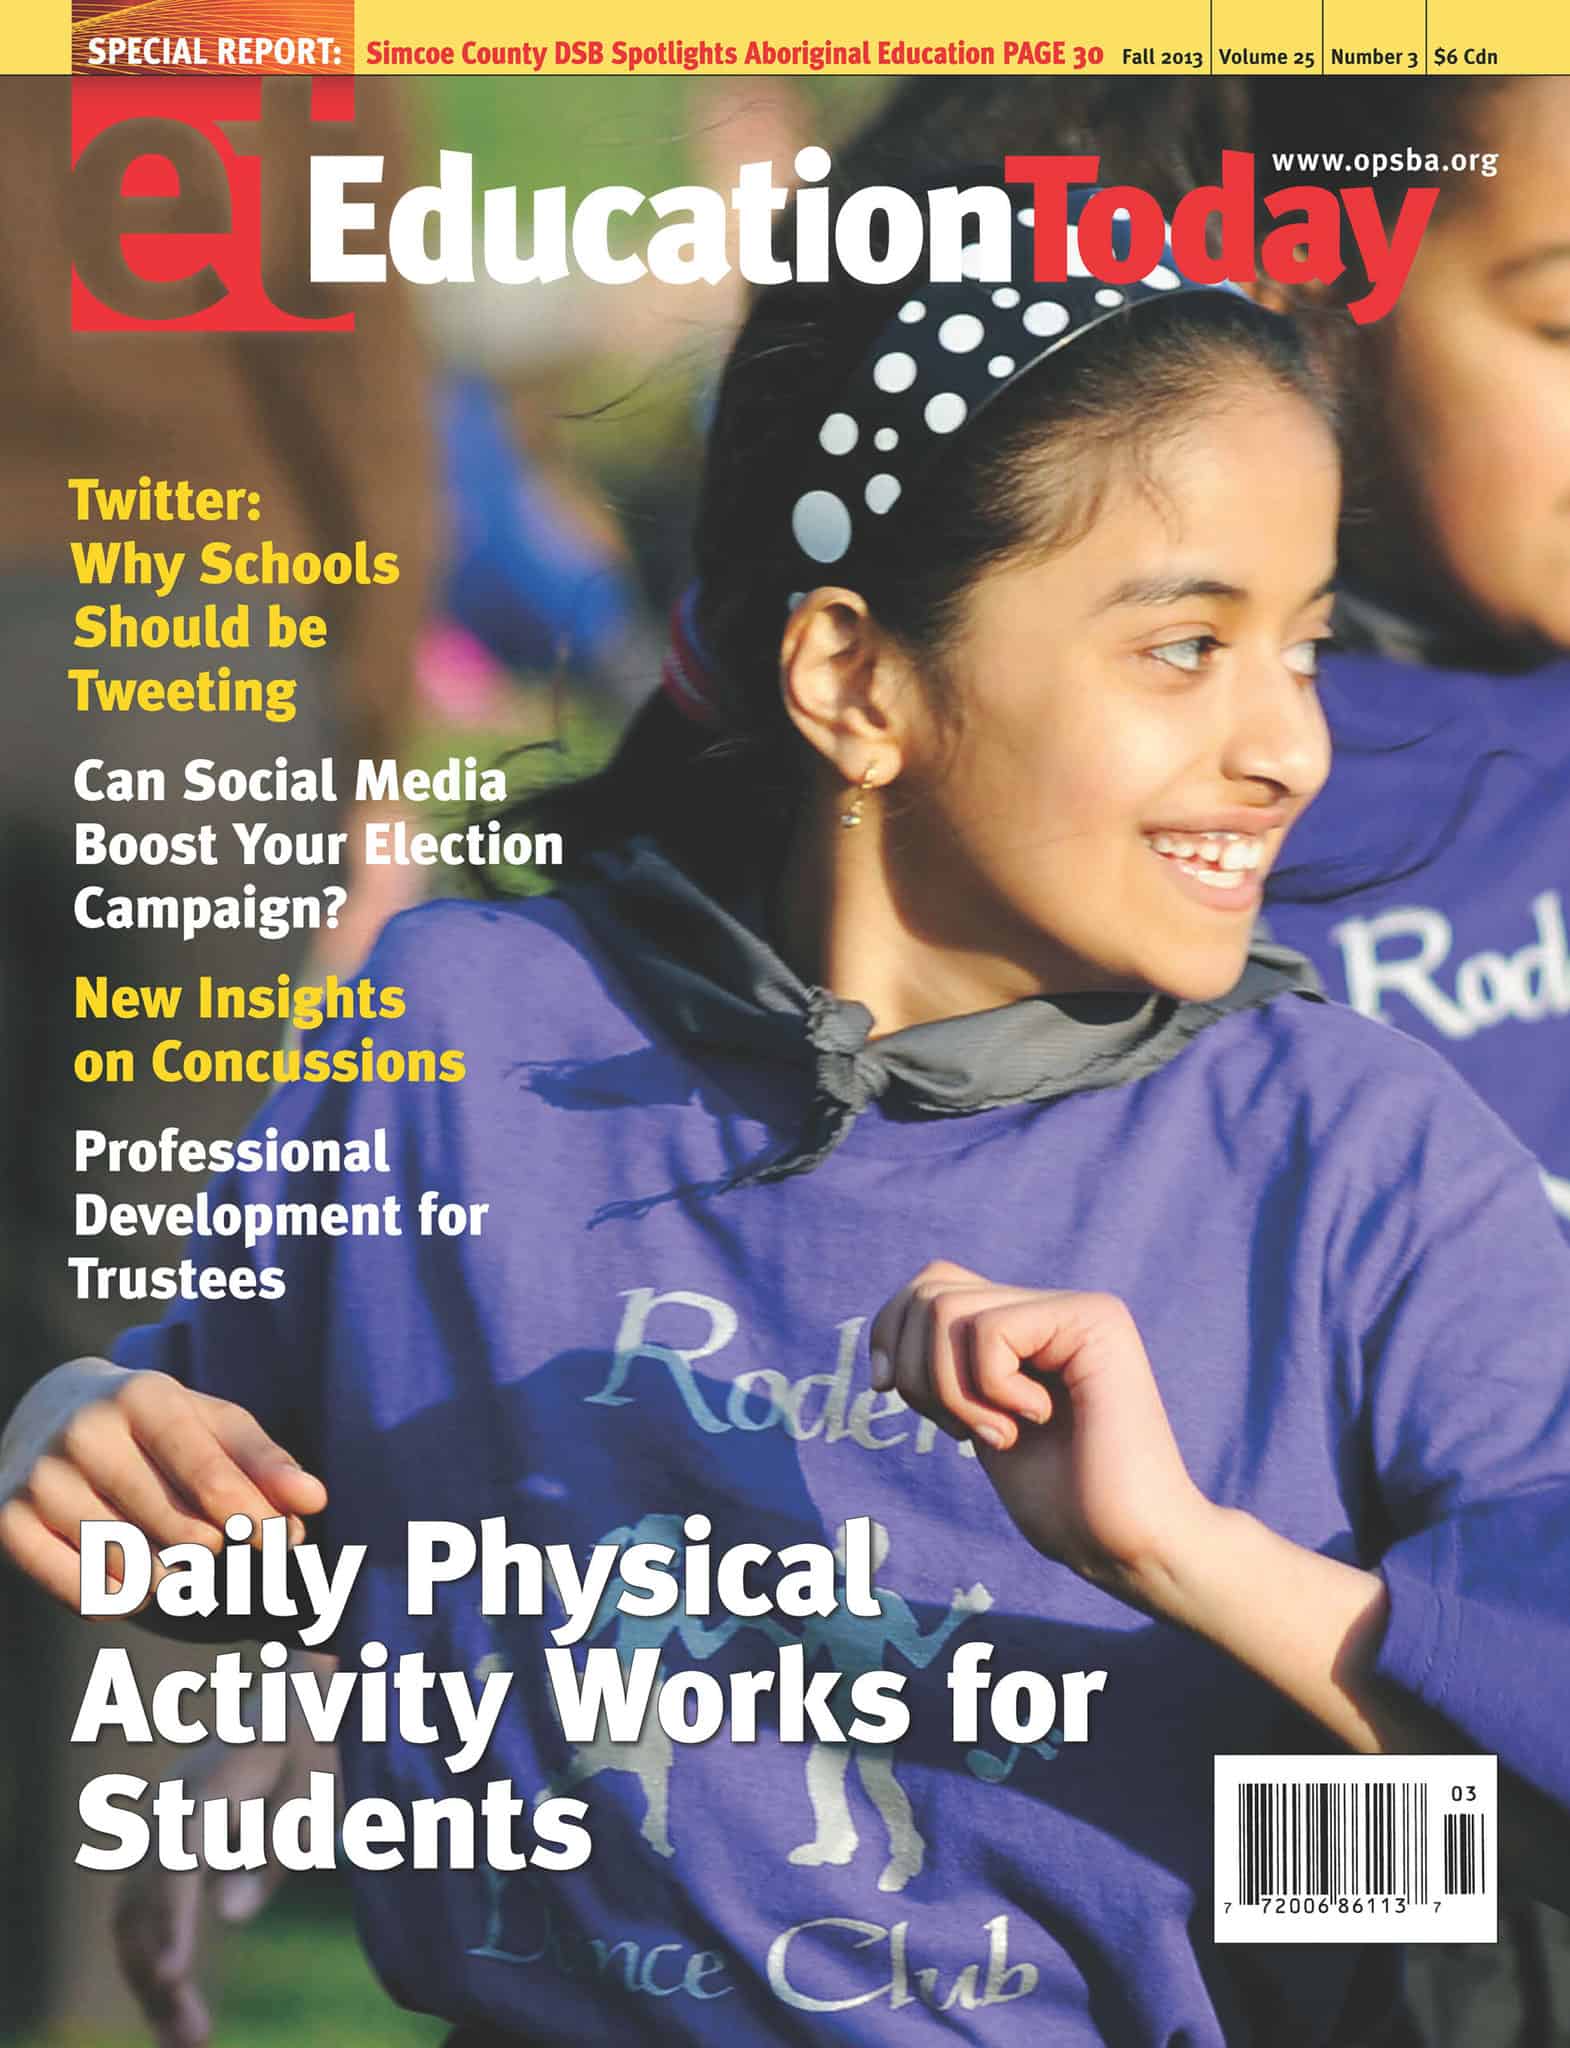 Education Today | Fall 2013 | Volume 25 Number 3